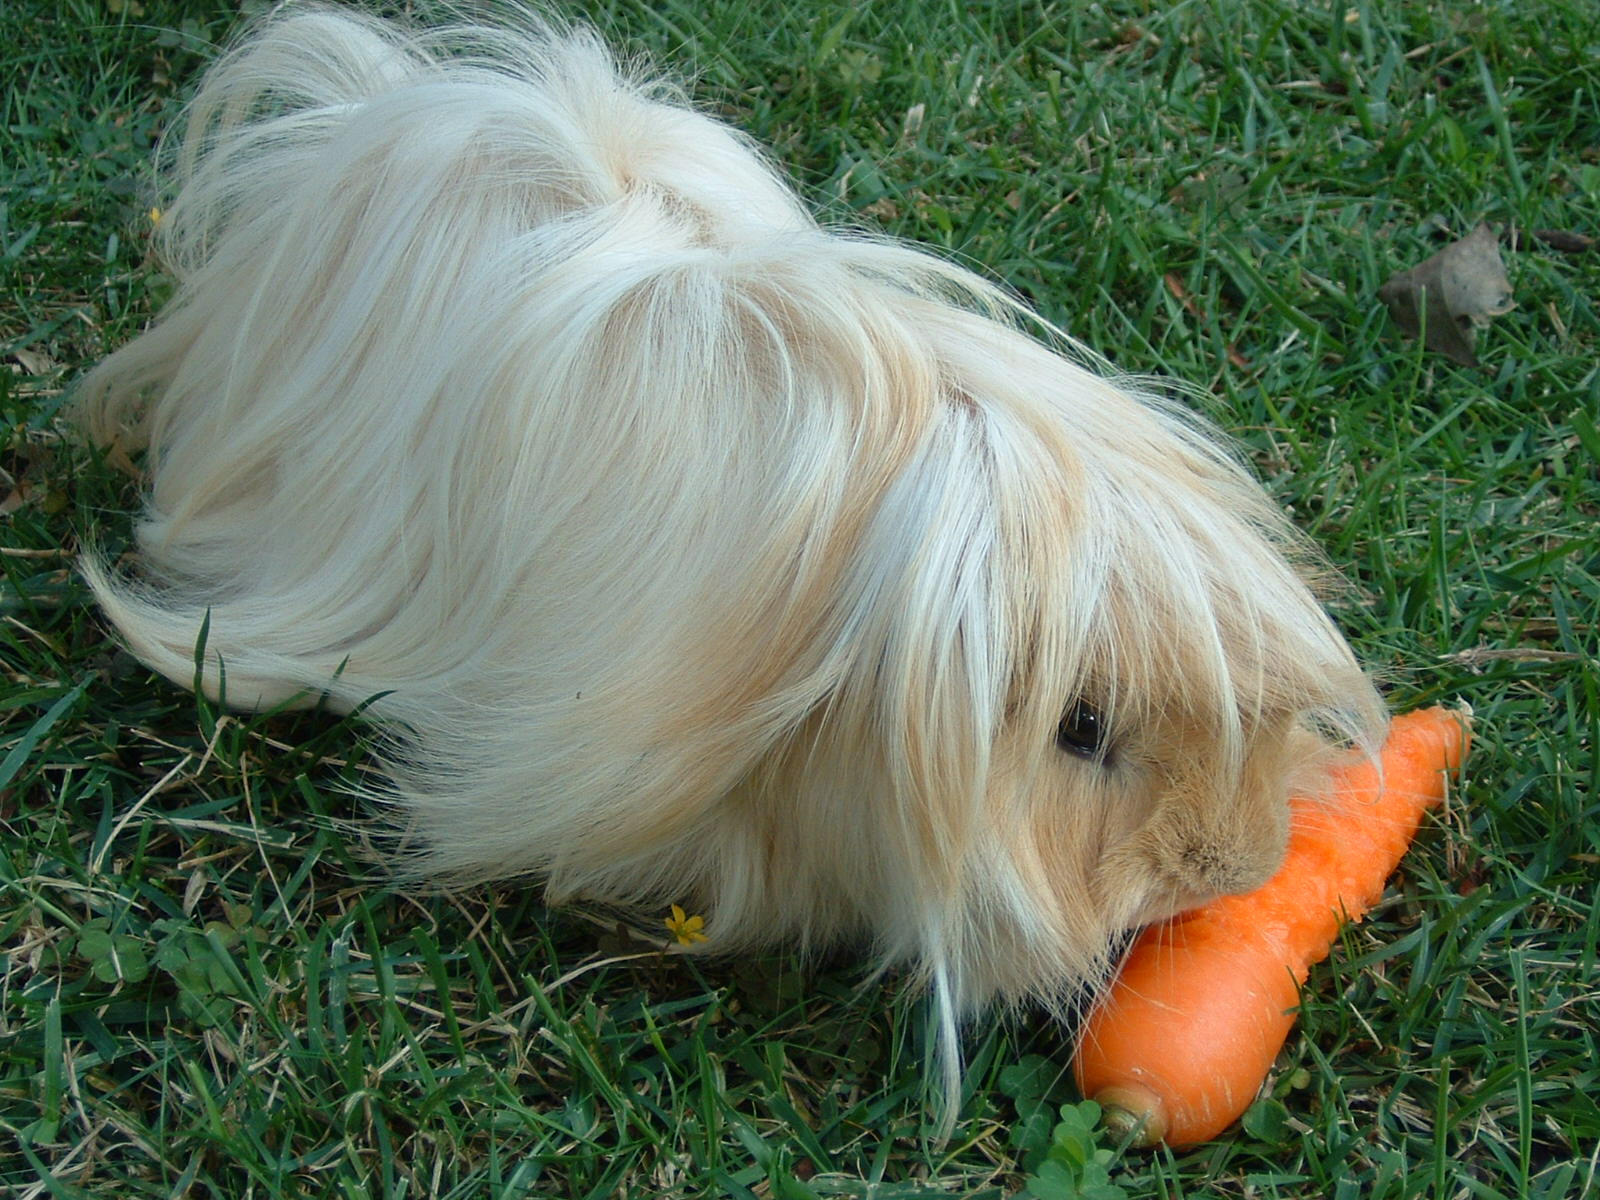 Rabbit%20with%20Carrot%20and%20Long%20Hair.jpg